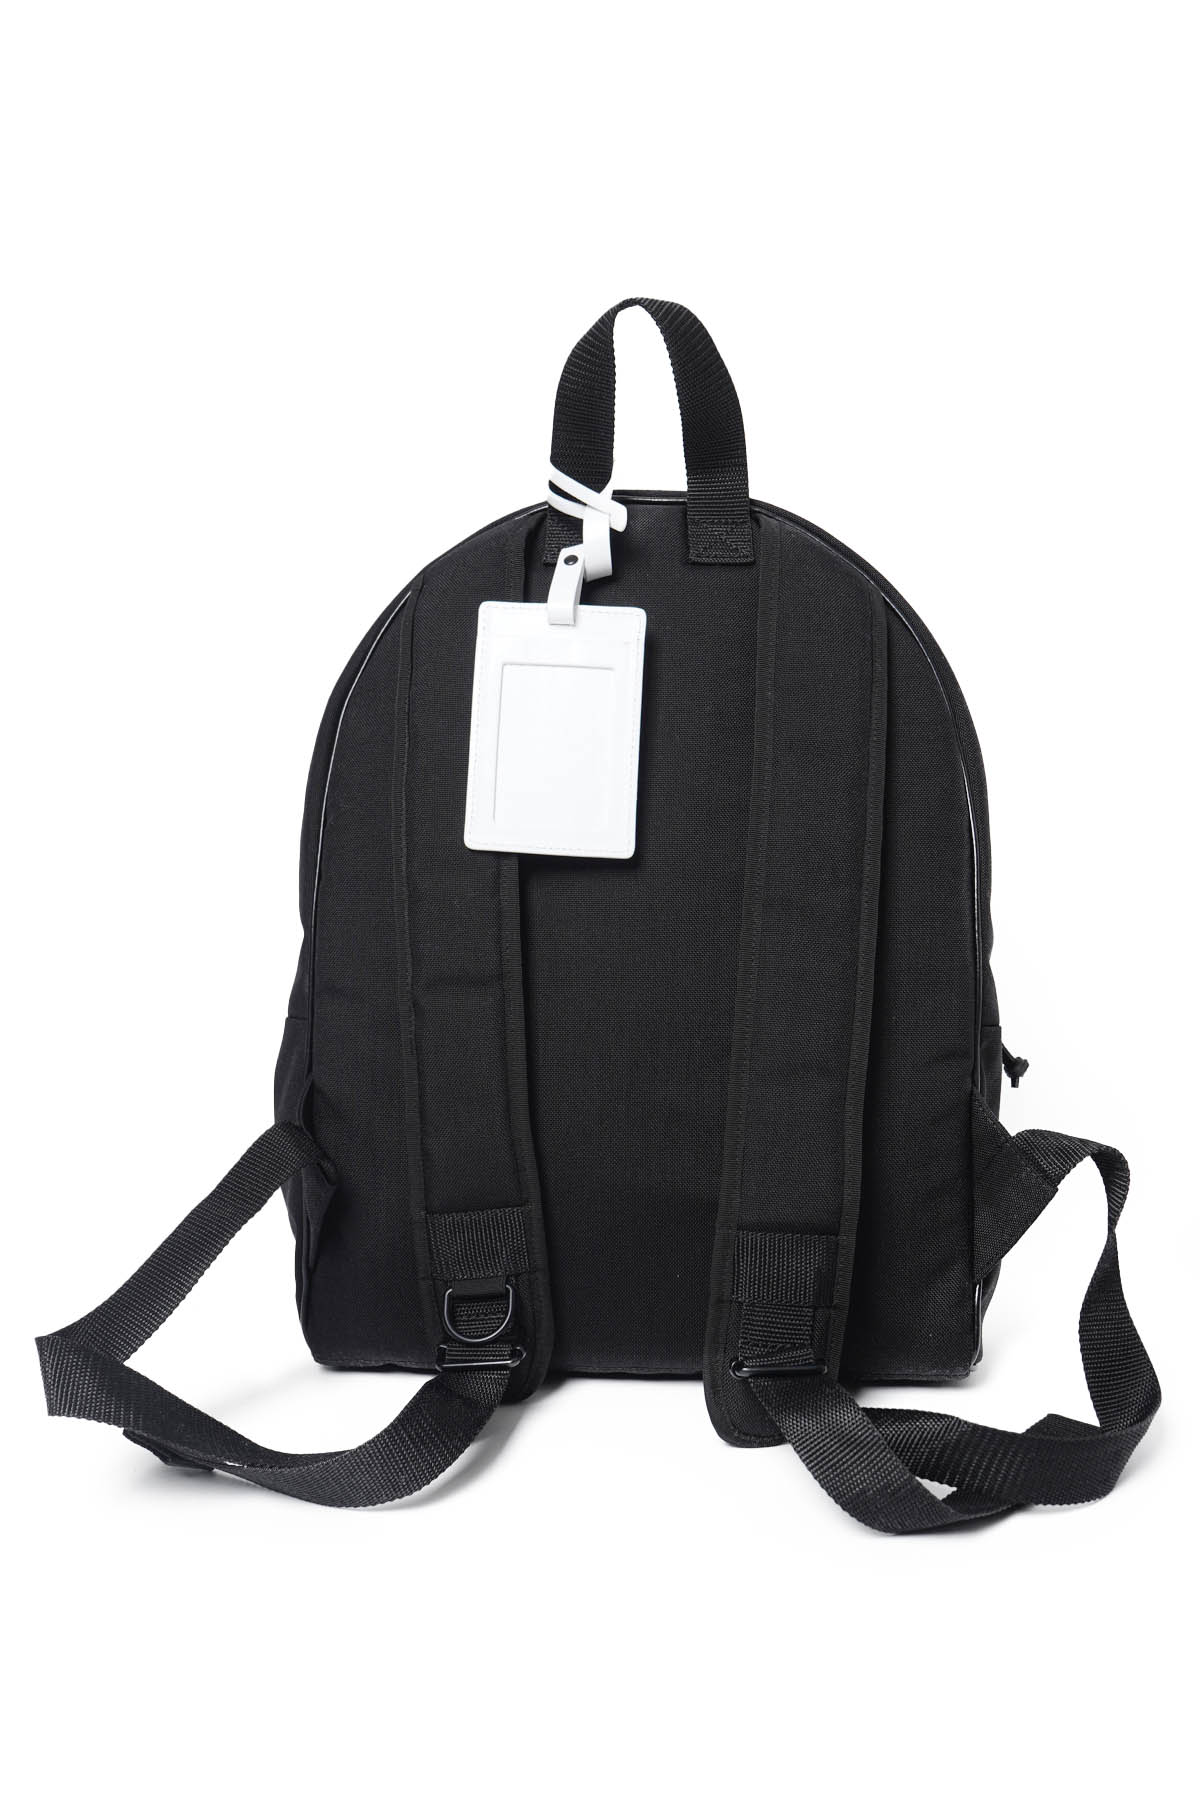 Backpack［2021SS］